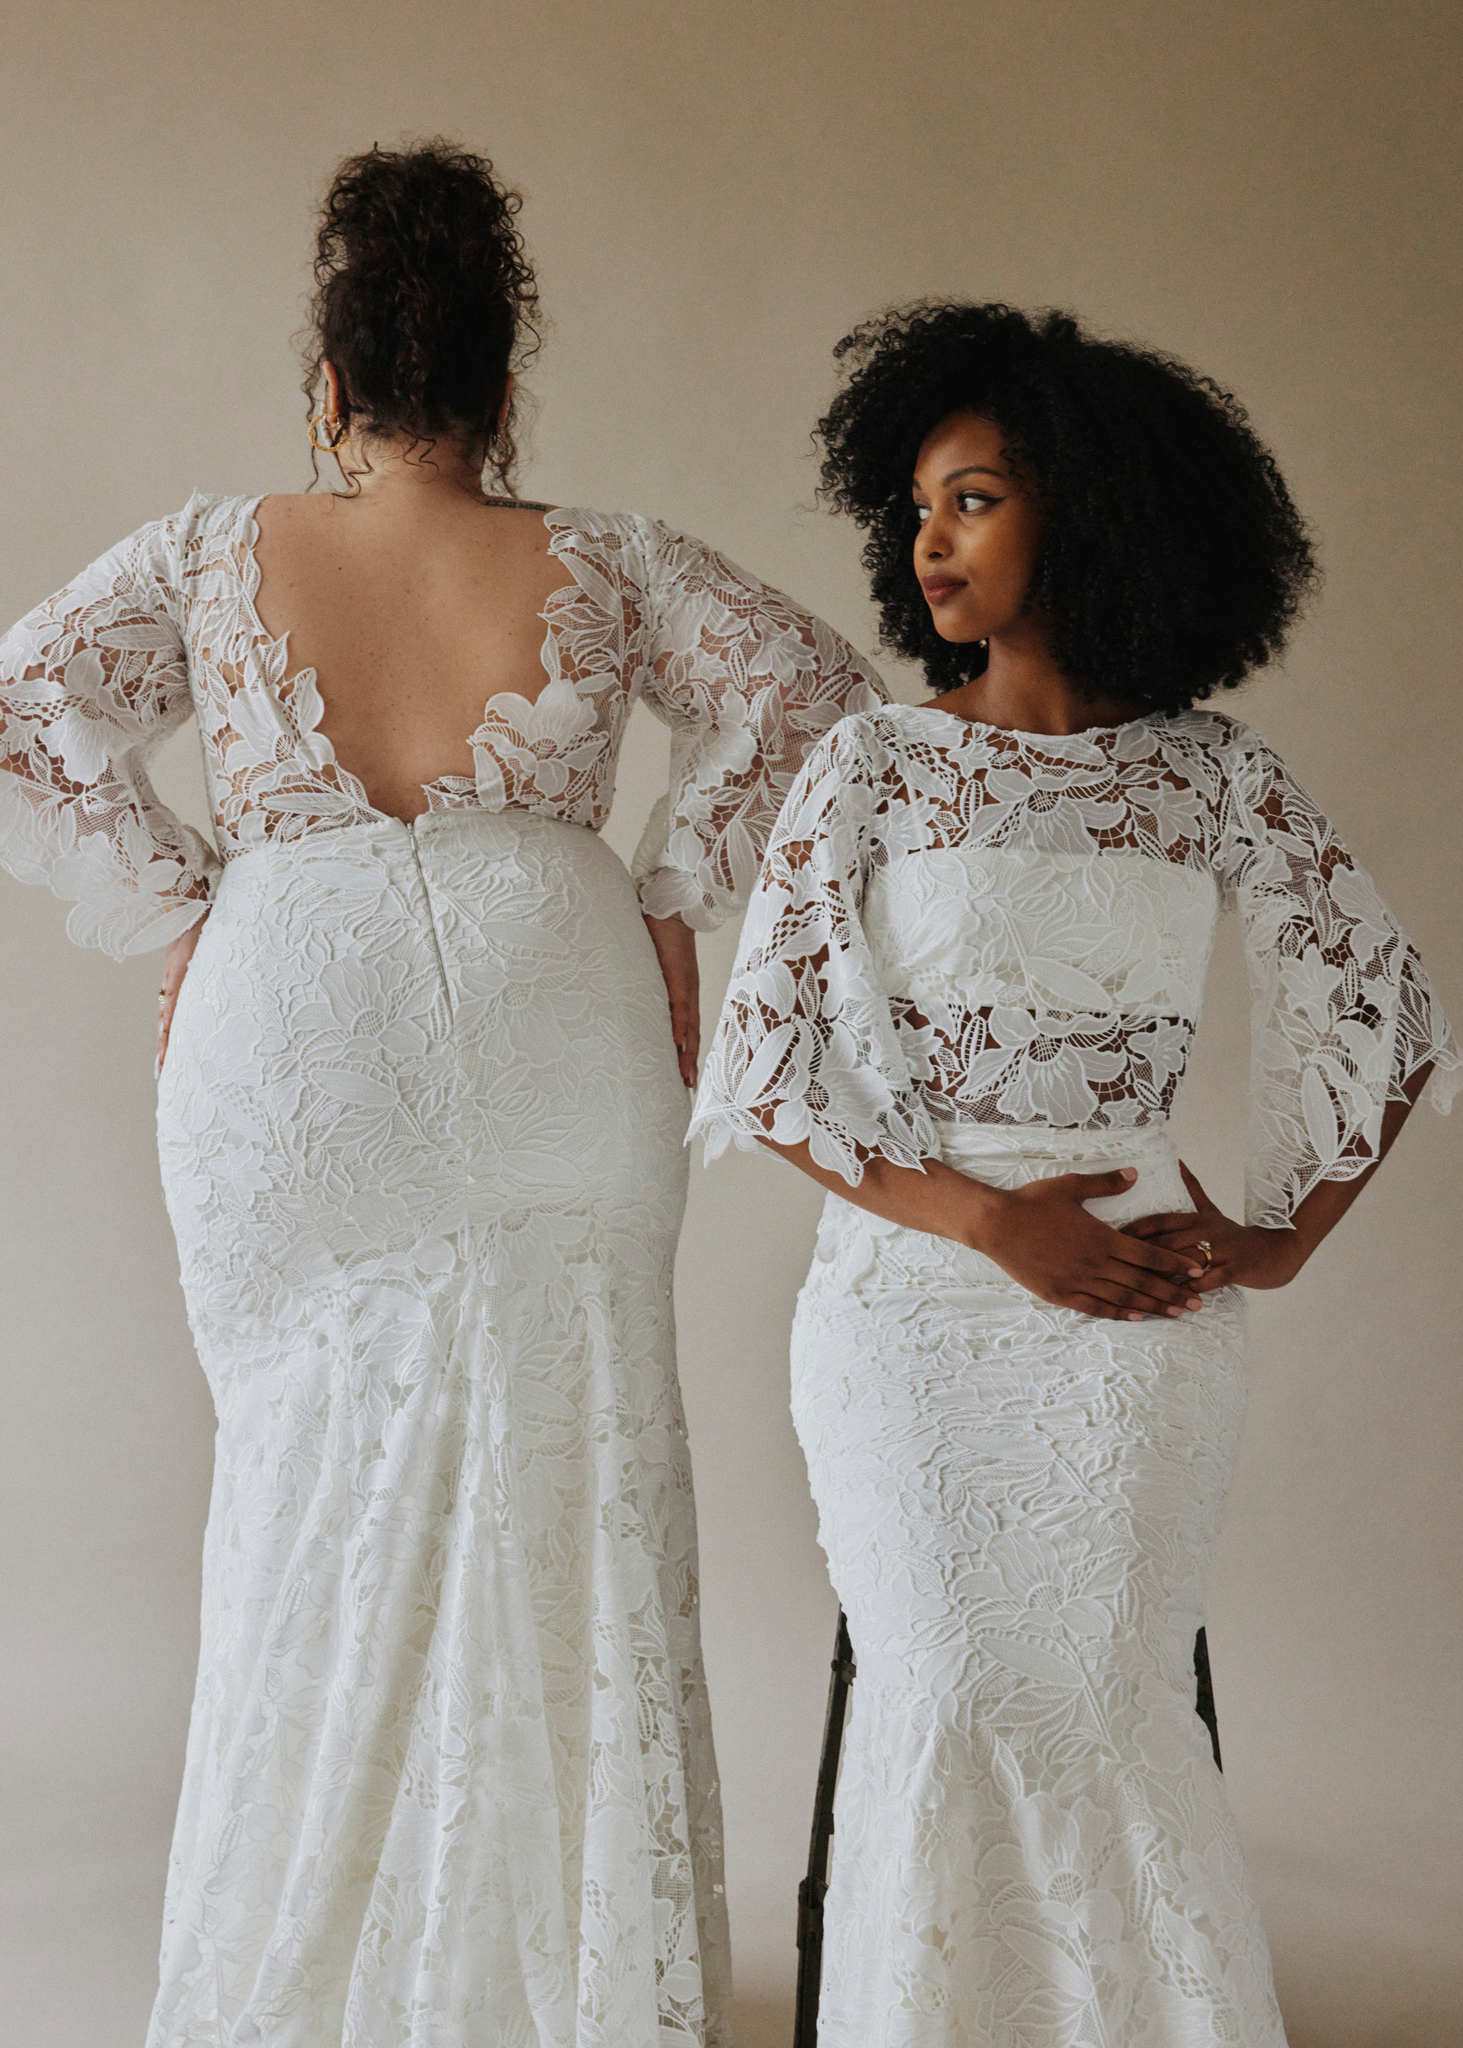 Chic bridal silhouettes from our favourite Canadian designers